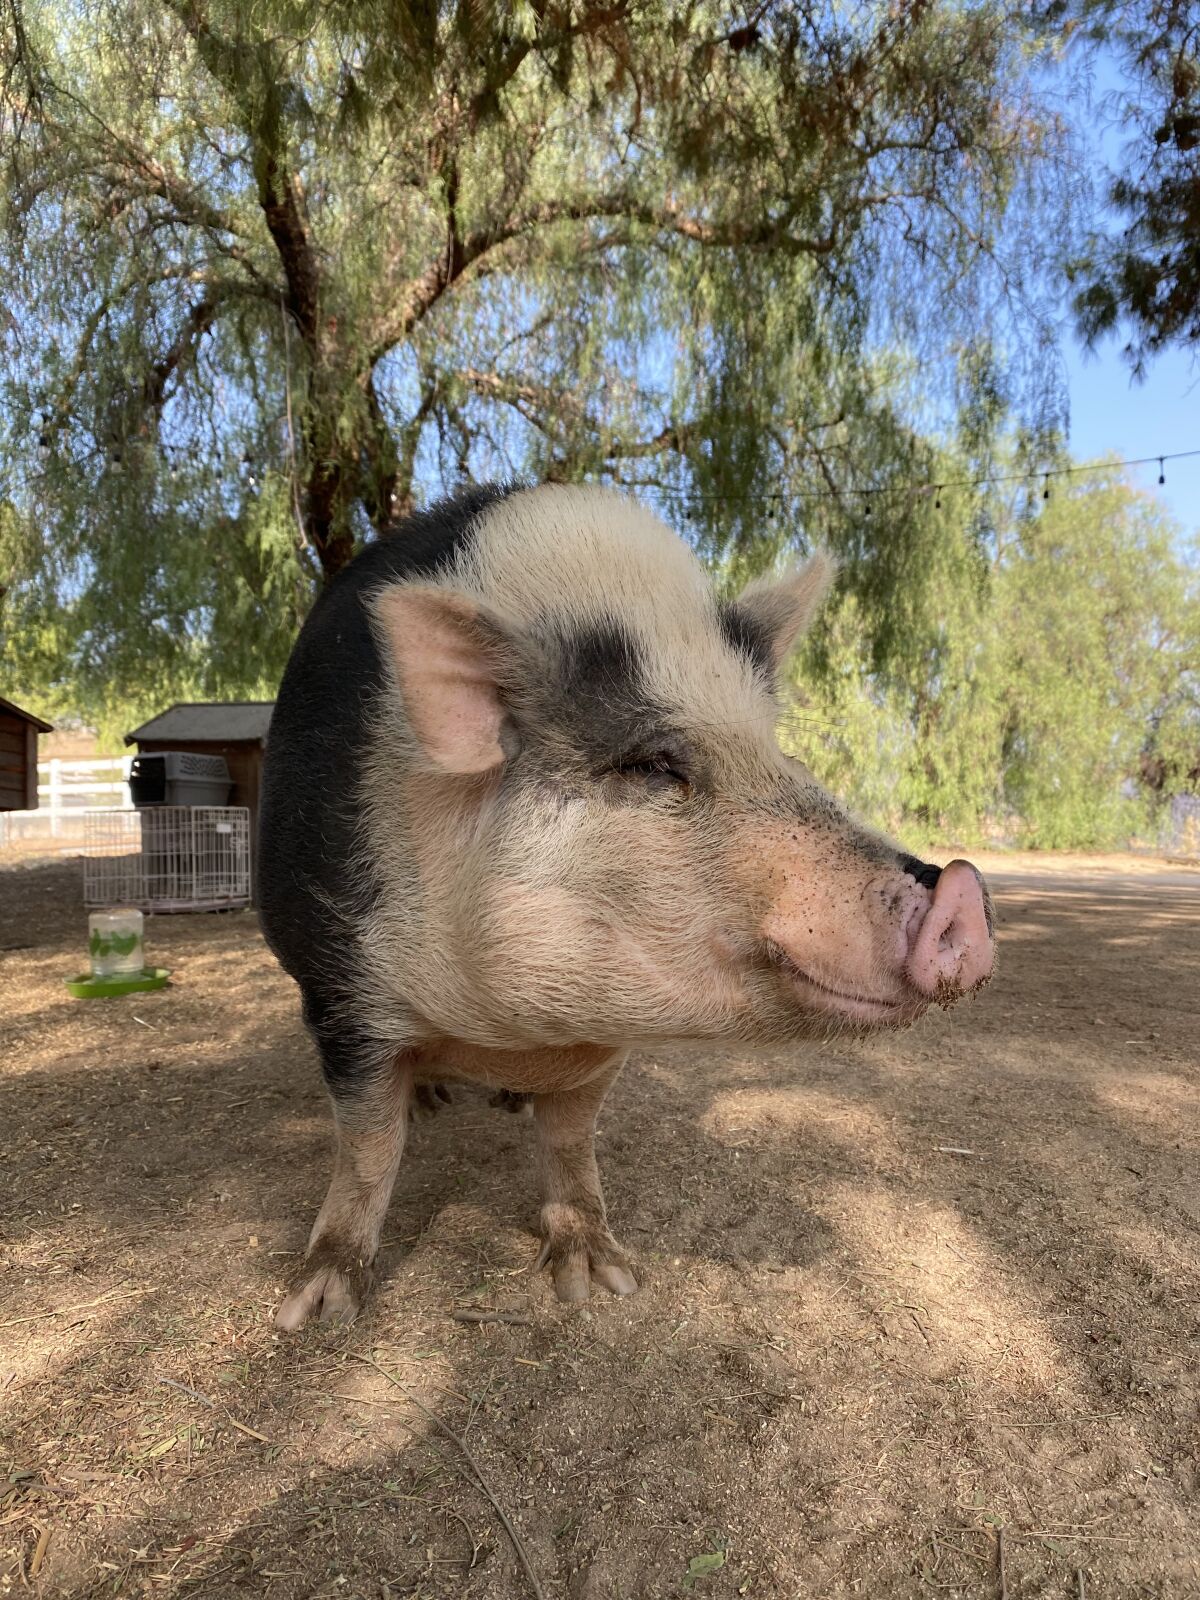 Bruce, a pig who lives at No Boundaries Farm, survived the September 2020 Valley Fire.